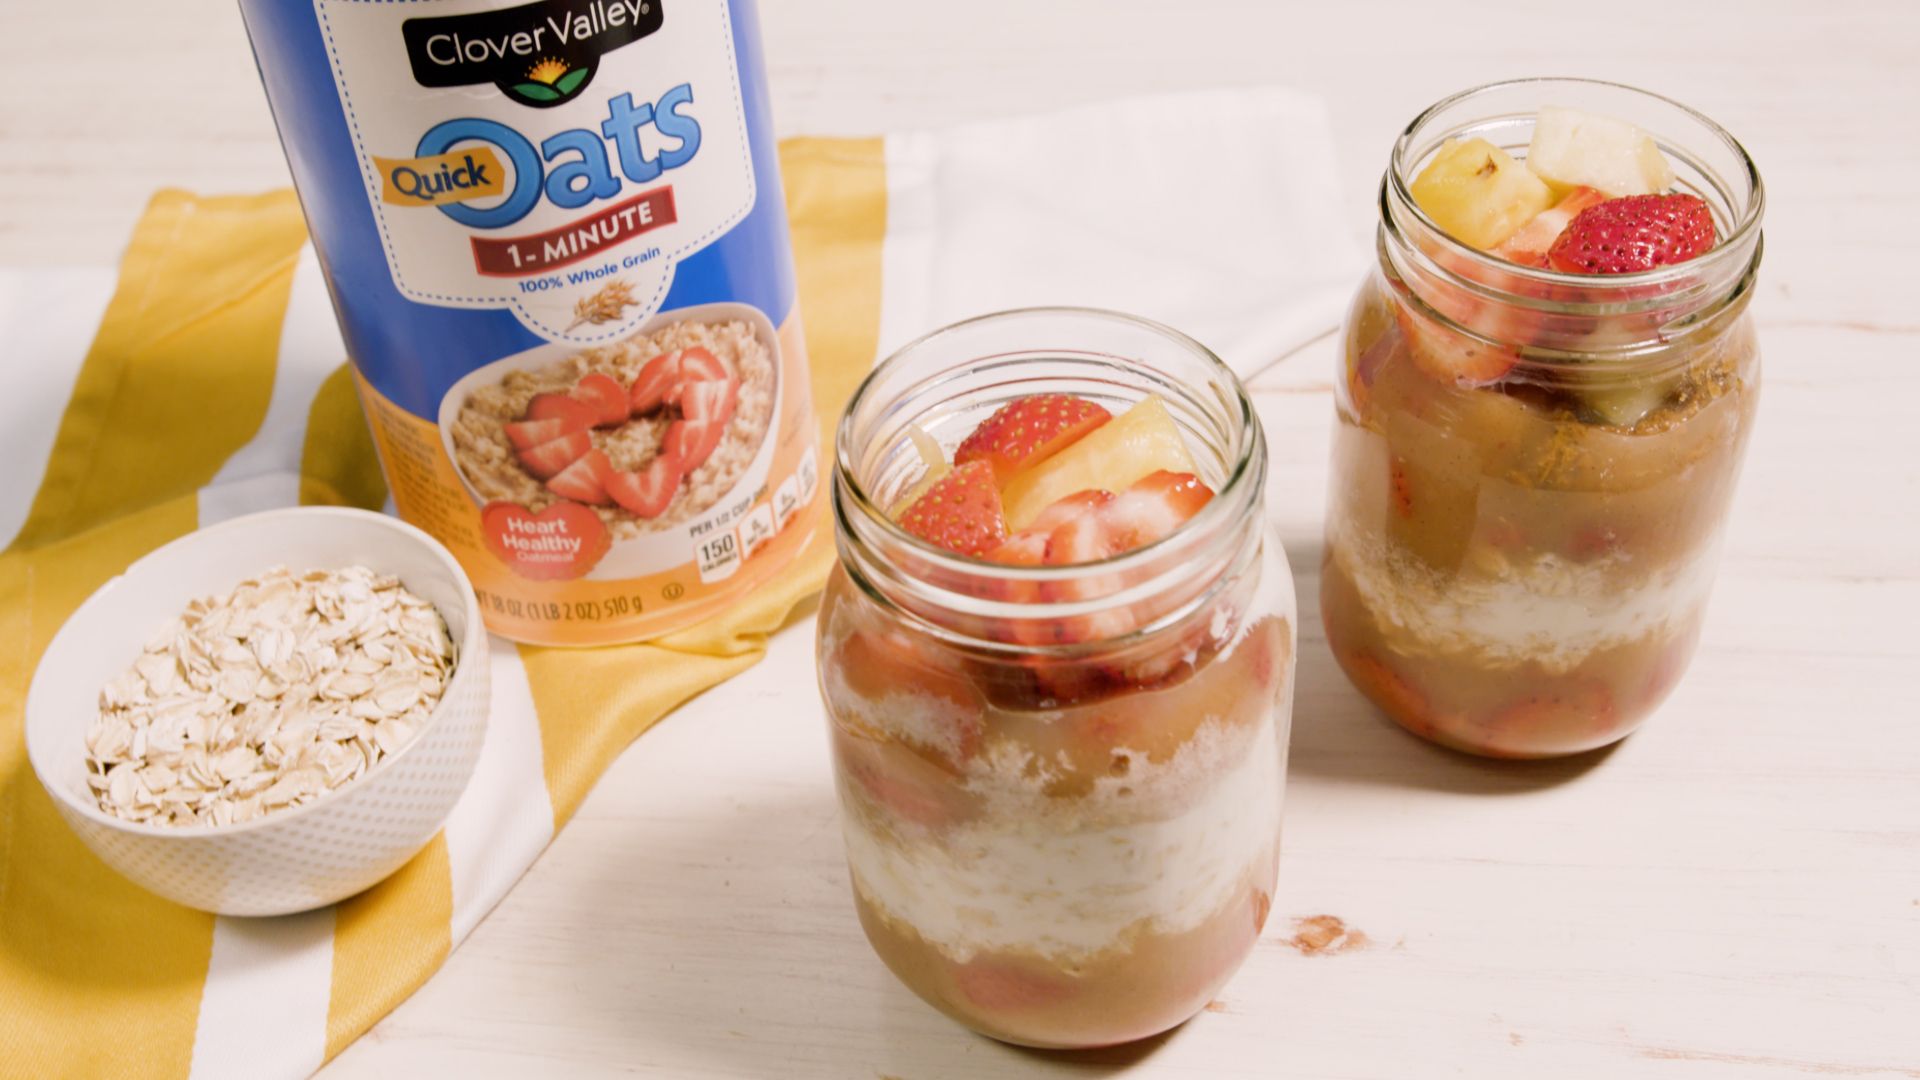 How to Make Overnight Oats {video}